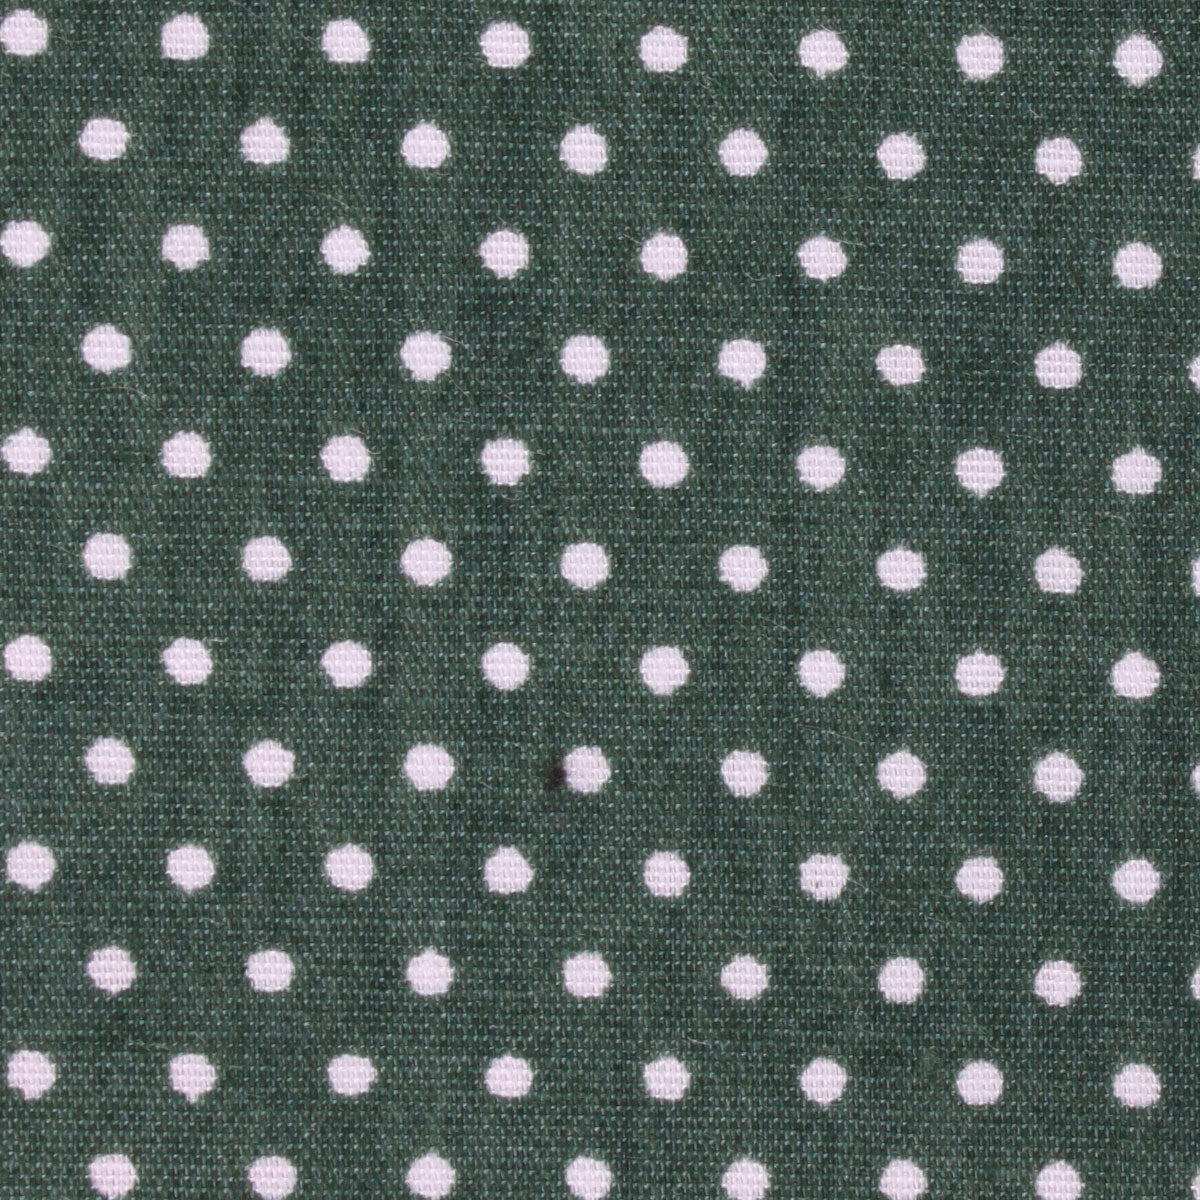 Olive Green Polka Dot Cotton Fabric Mens Bow Tie